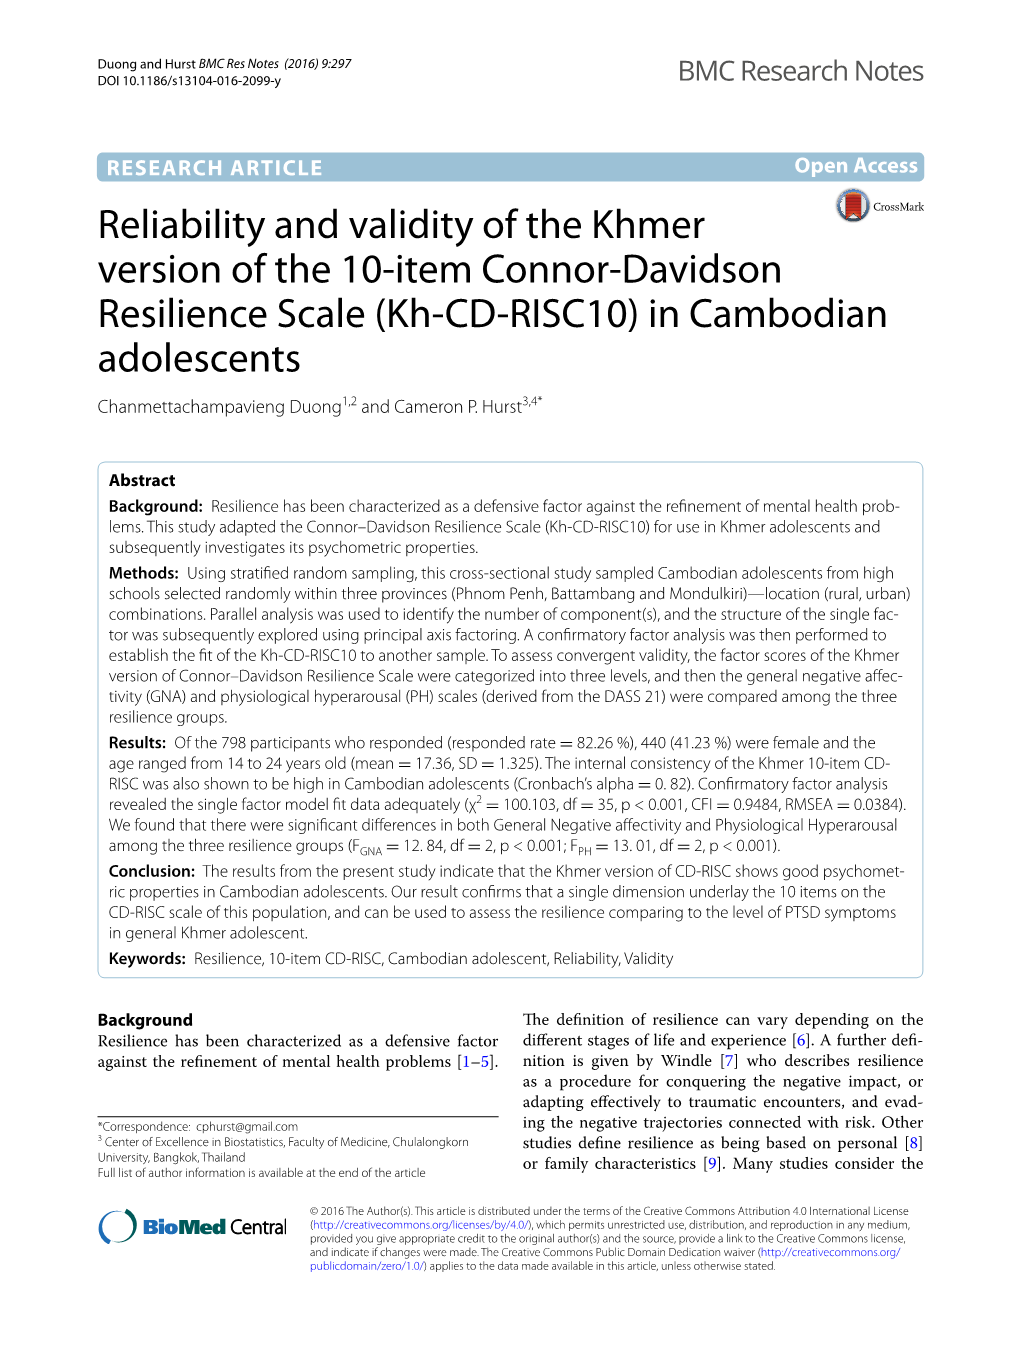 (Kh-CD-RISC10) in Cambodian Adoles